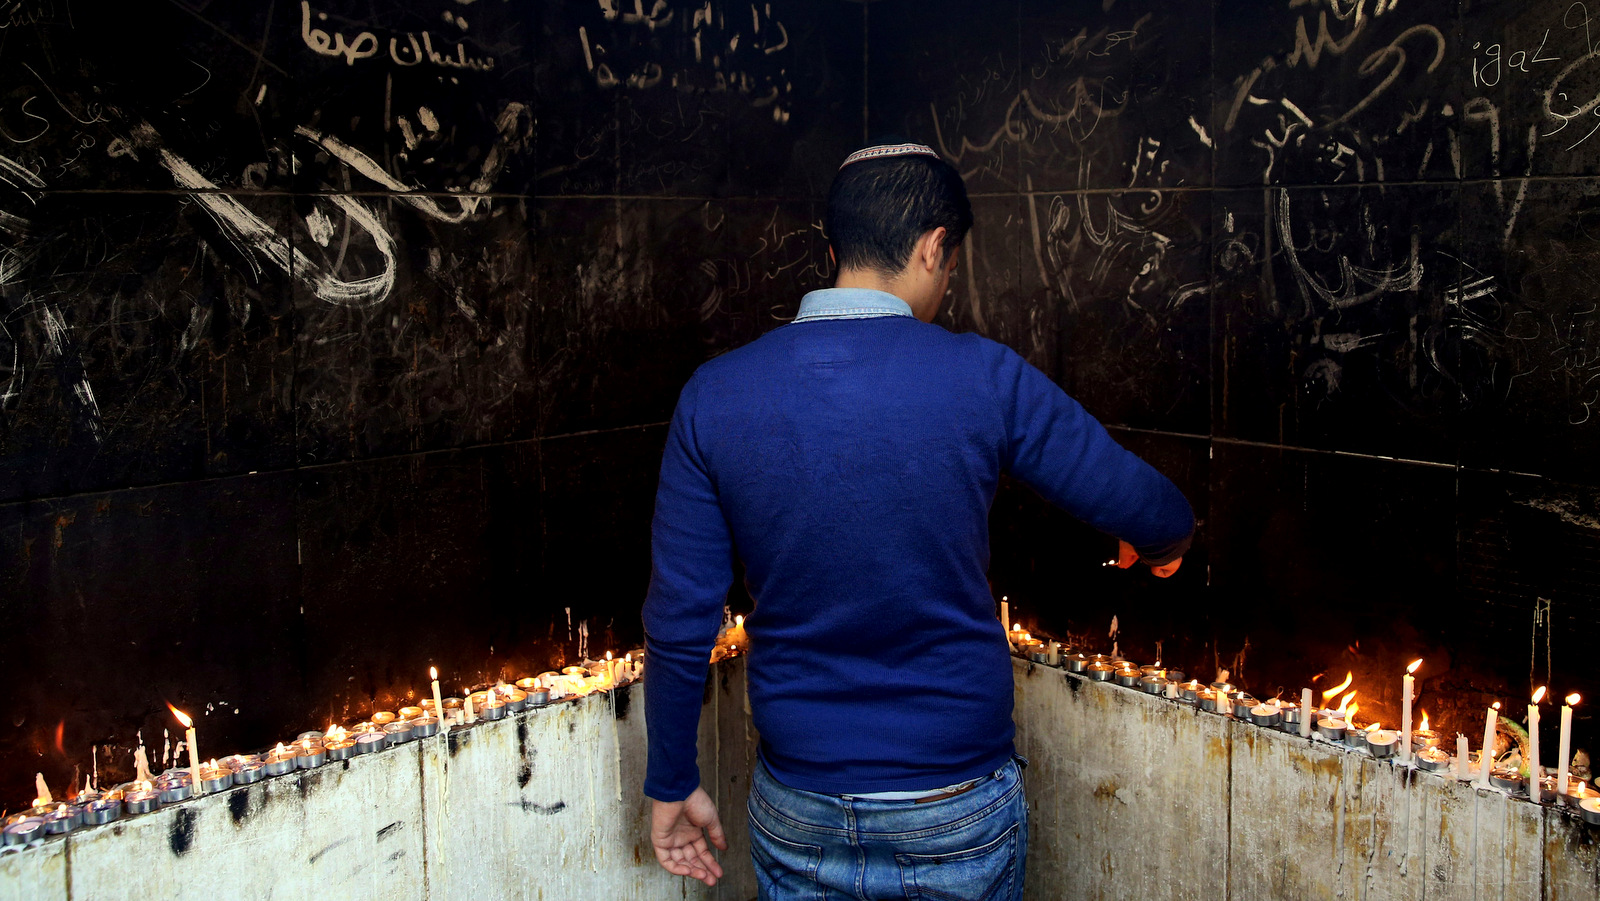 In this Thursday, Nov. 20, 2014 photo, an Iranian Jewish man lights candles at the at the tomb of Harav Oursharga, one of the holiest Jewish sites in Iran, in the city of Yazd 420 miles (676 kilometers) south of capital Tehran. More than a thousand people trekked across Iran this past week to visit a shrine in this ancient Persian city, a pilgrimages like many others in the Islamic Republic until you notice men there wearing yarmulkes. (AP Photo/Ebrahim Noroozi)